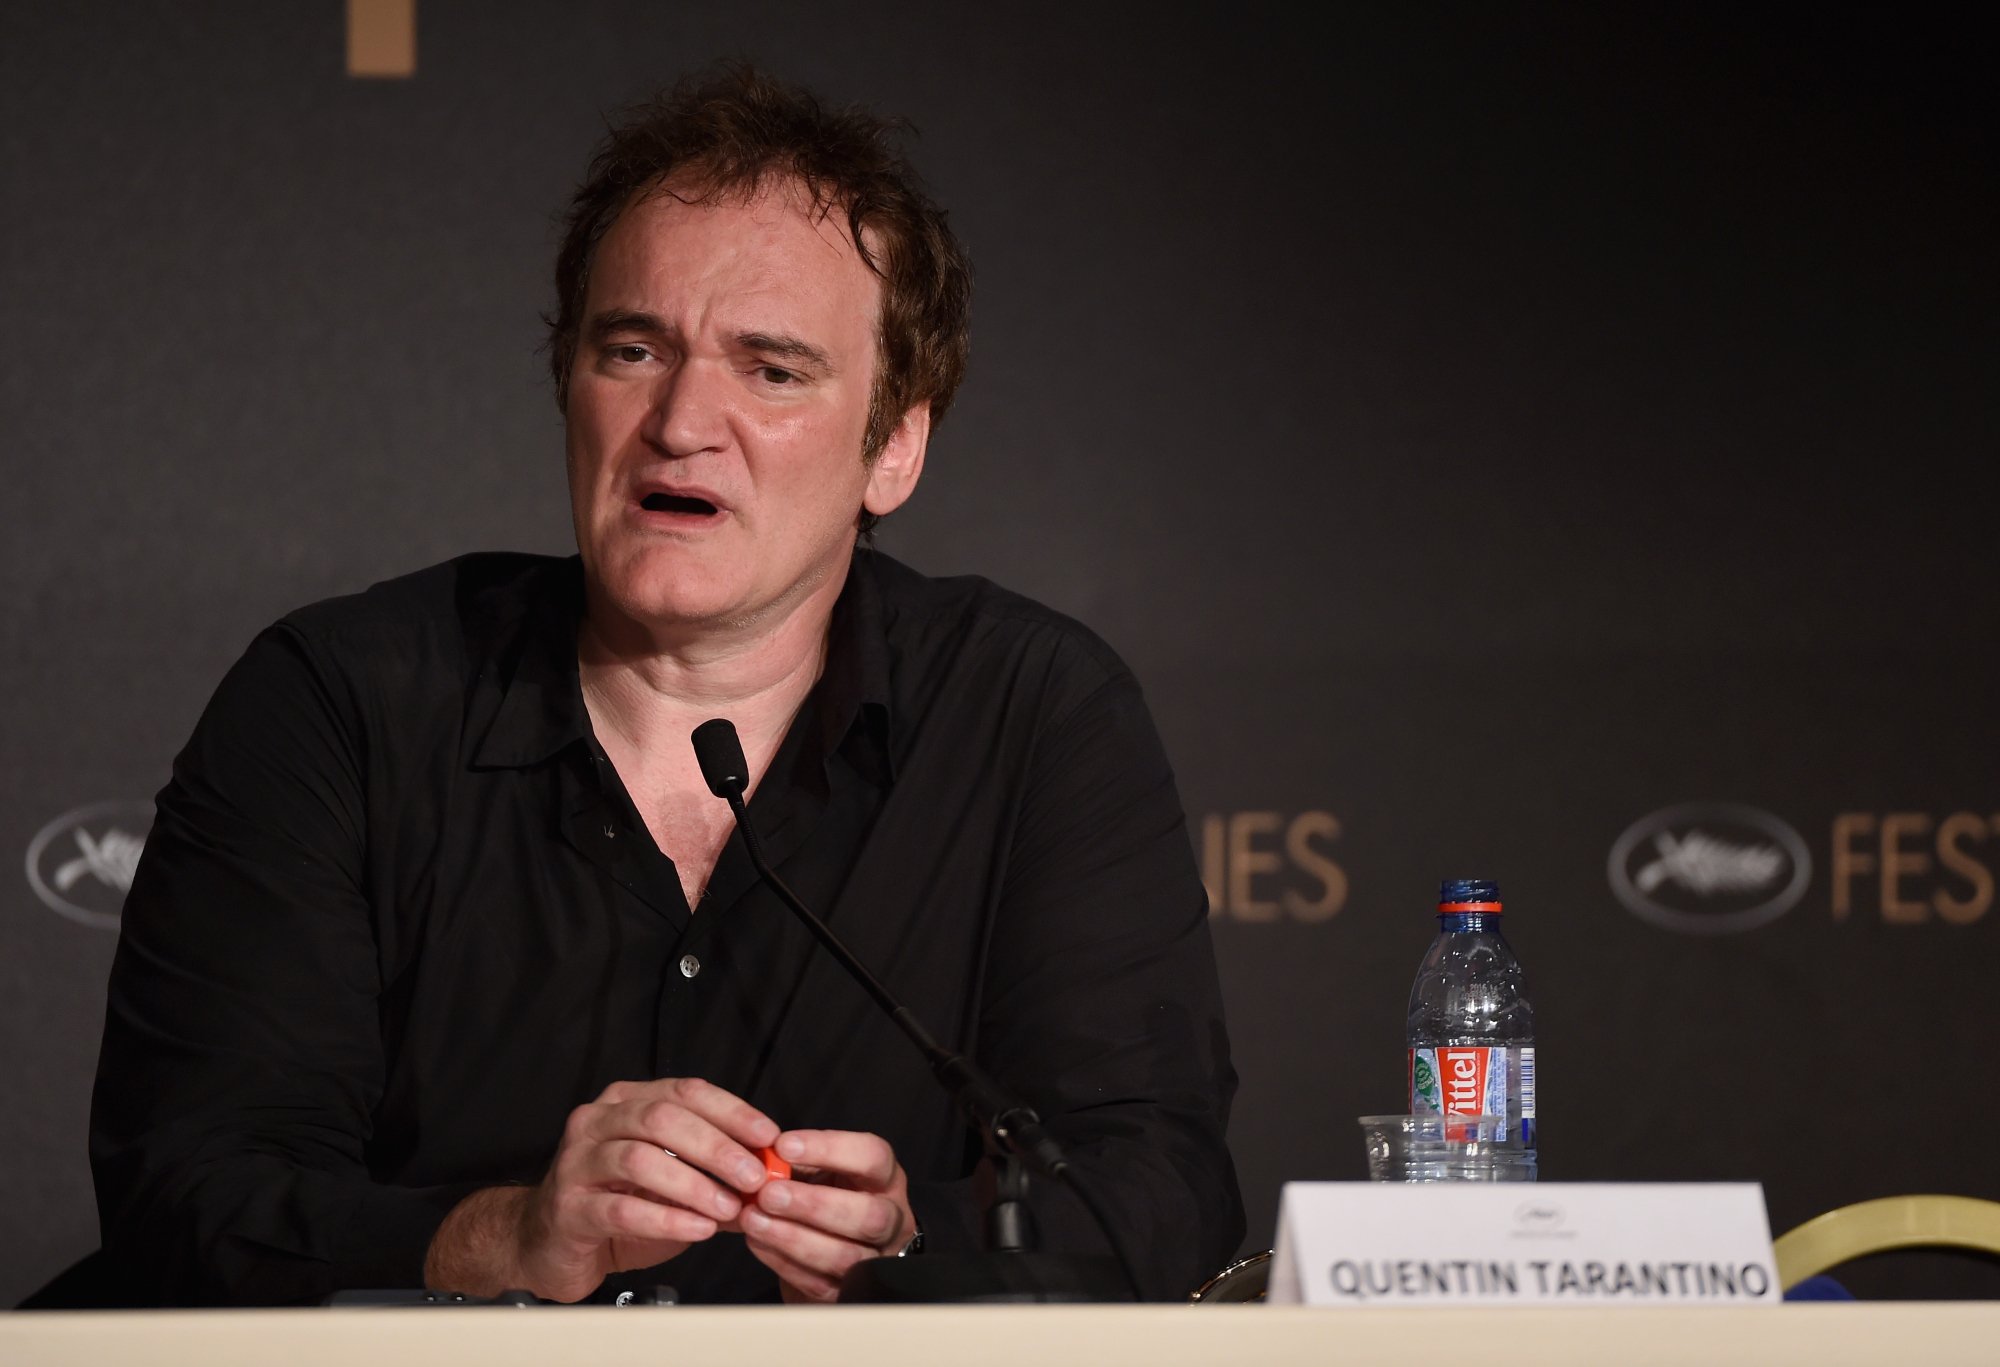 Quentin Tarantino at the Cannes Film Festival talking into a mic